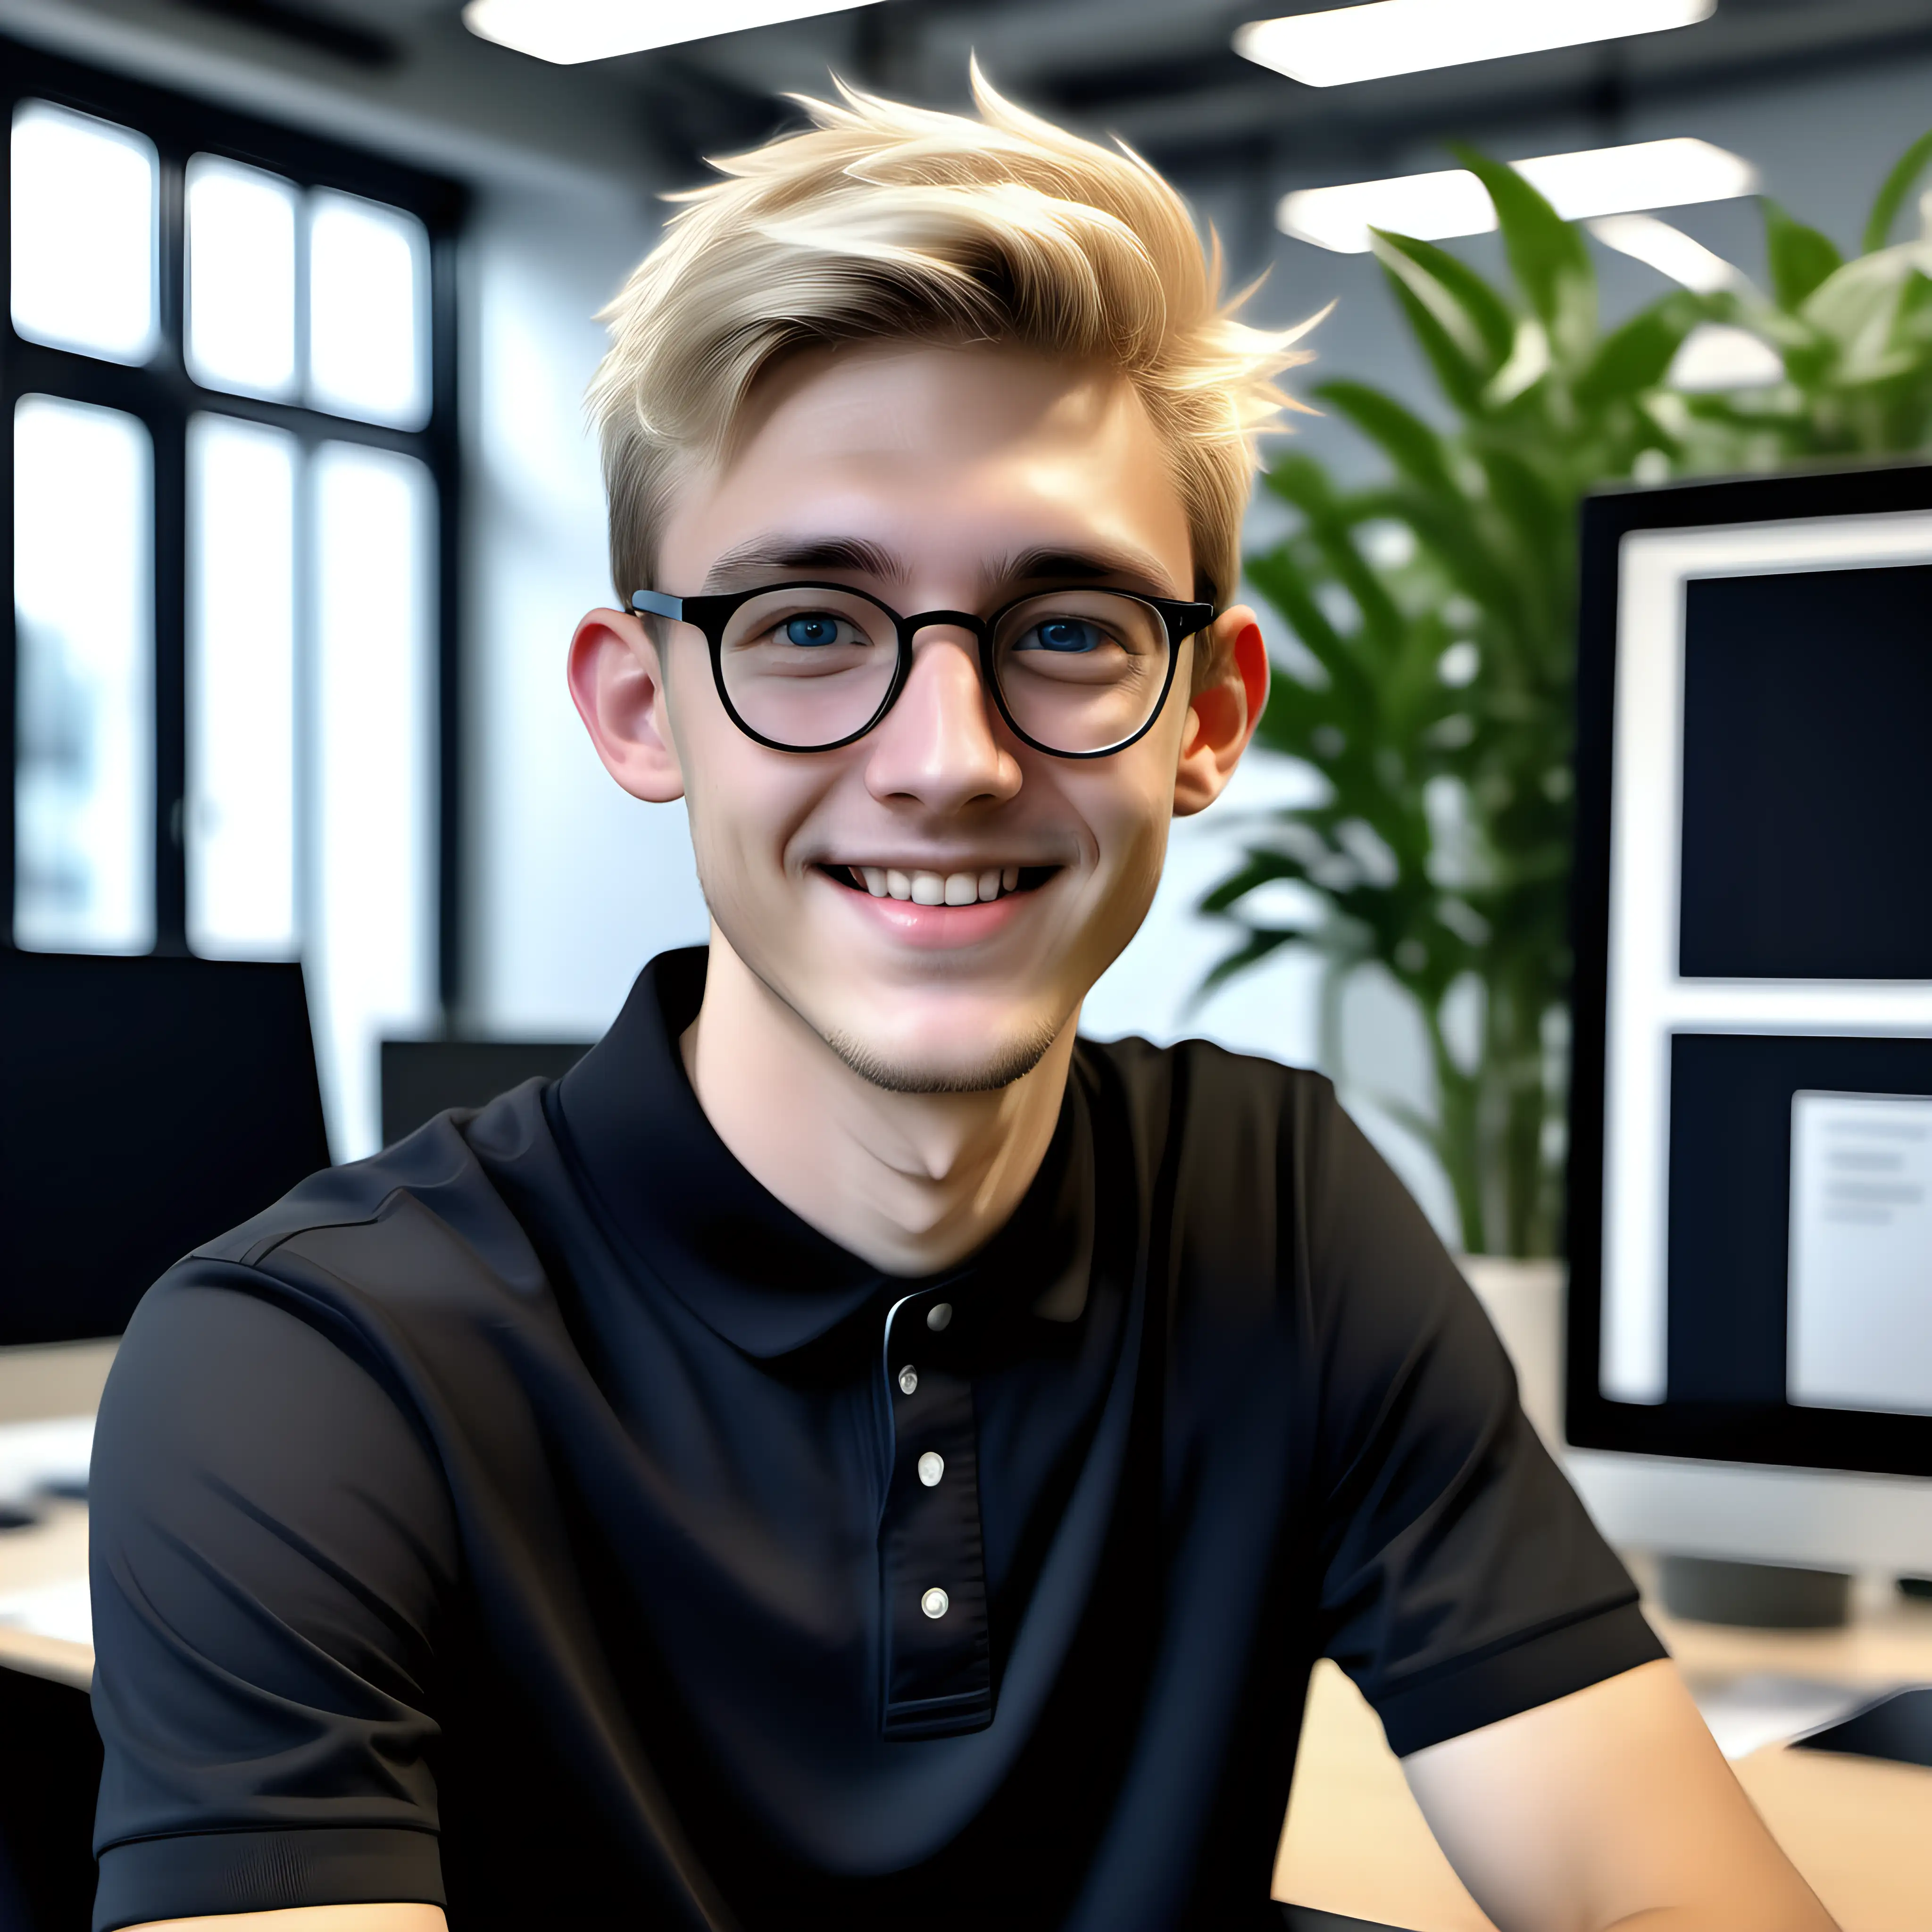 [boyish skinny British male] avatar sitting at down, [medium length blonde hair, happy eyes, no whiskers visible] [wearing round black wire frame reading glasses and polo top] [enthusiastic, happy and helpful], [new junior employee whose starting at a new tech startup], modern office background with desks, plants realistic.